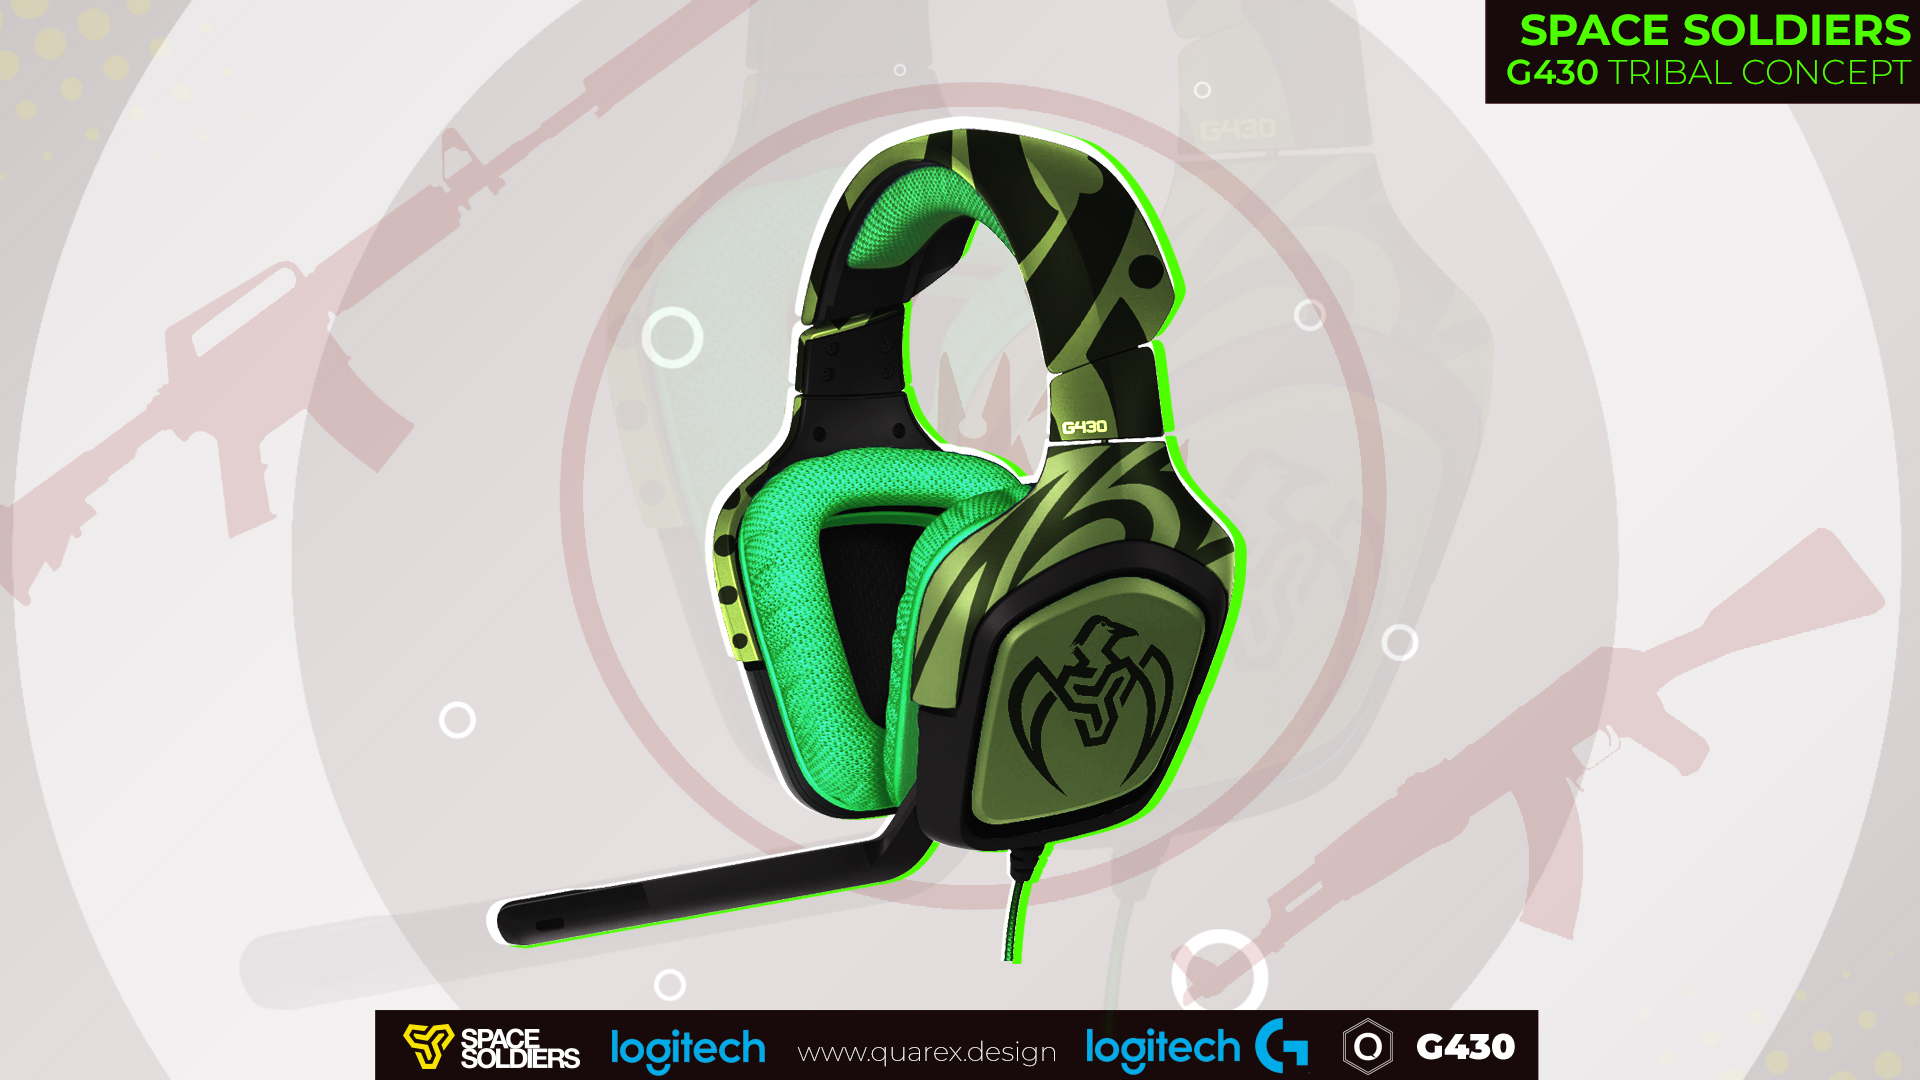 Logitech G430 - SpaceSoldiers Tribal Concept by quarexdesign